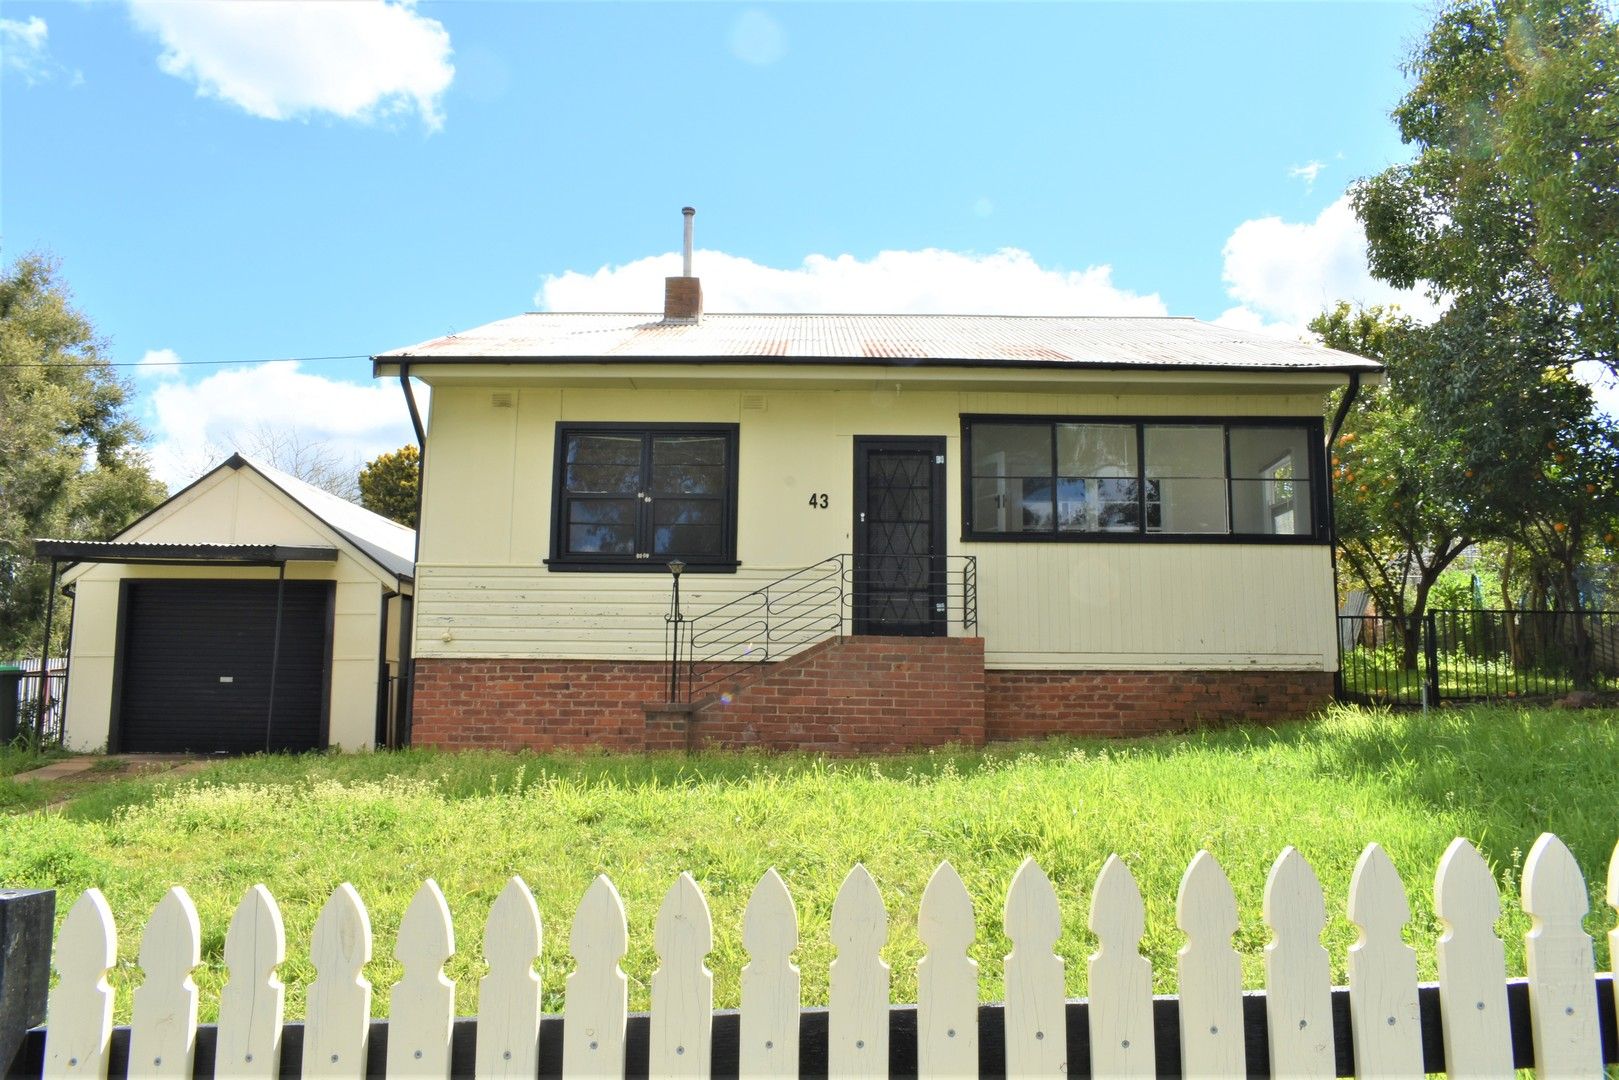 3 bedrooms House in 43 Yass Street YOUNG NSW, 2594